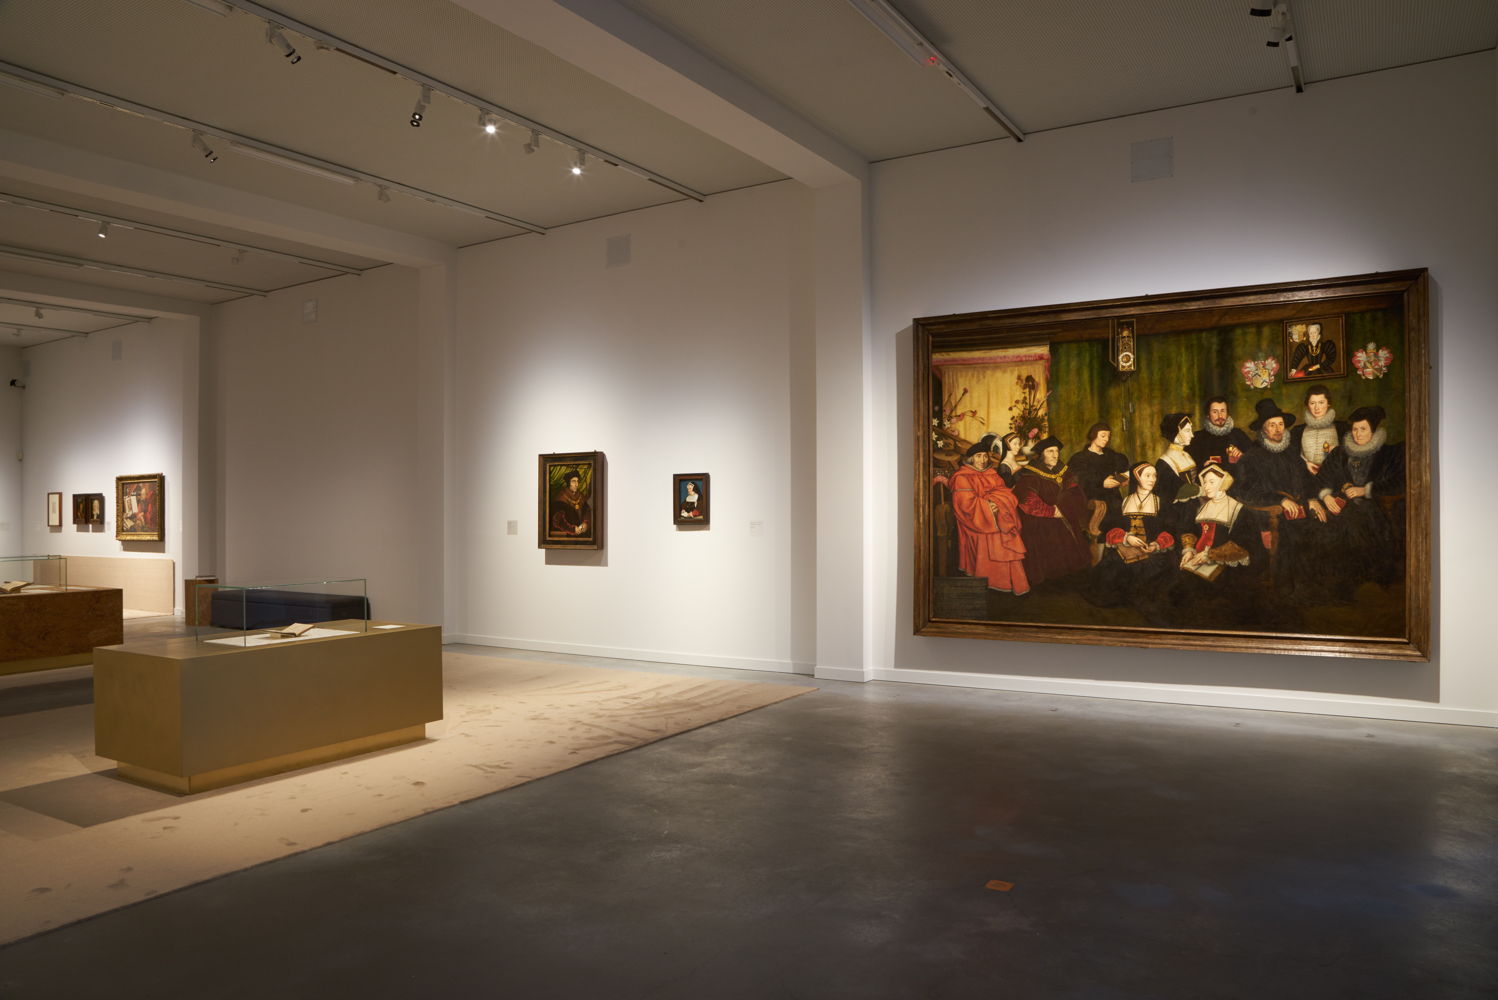 Installation view 'In search for Utopia' at M-Museum Leuven
Photo (c) Dirk Pauwels